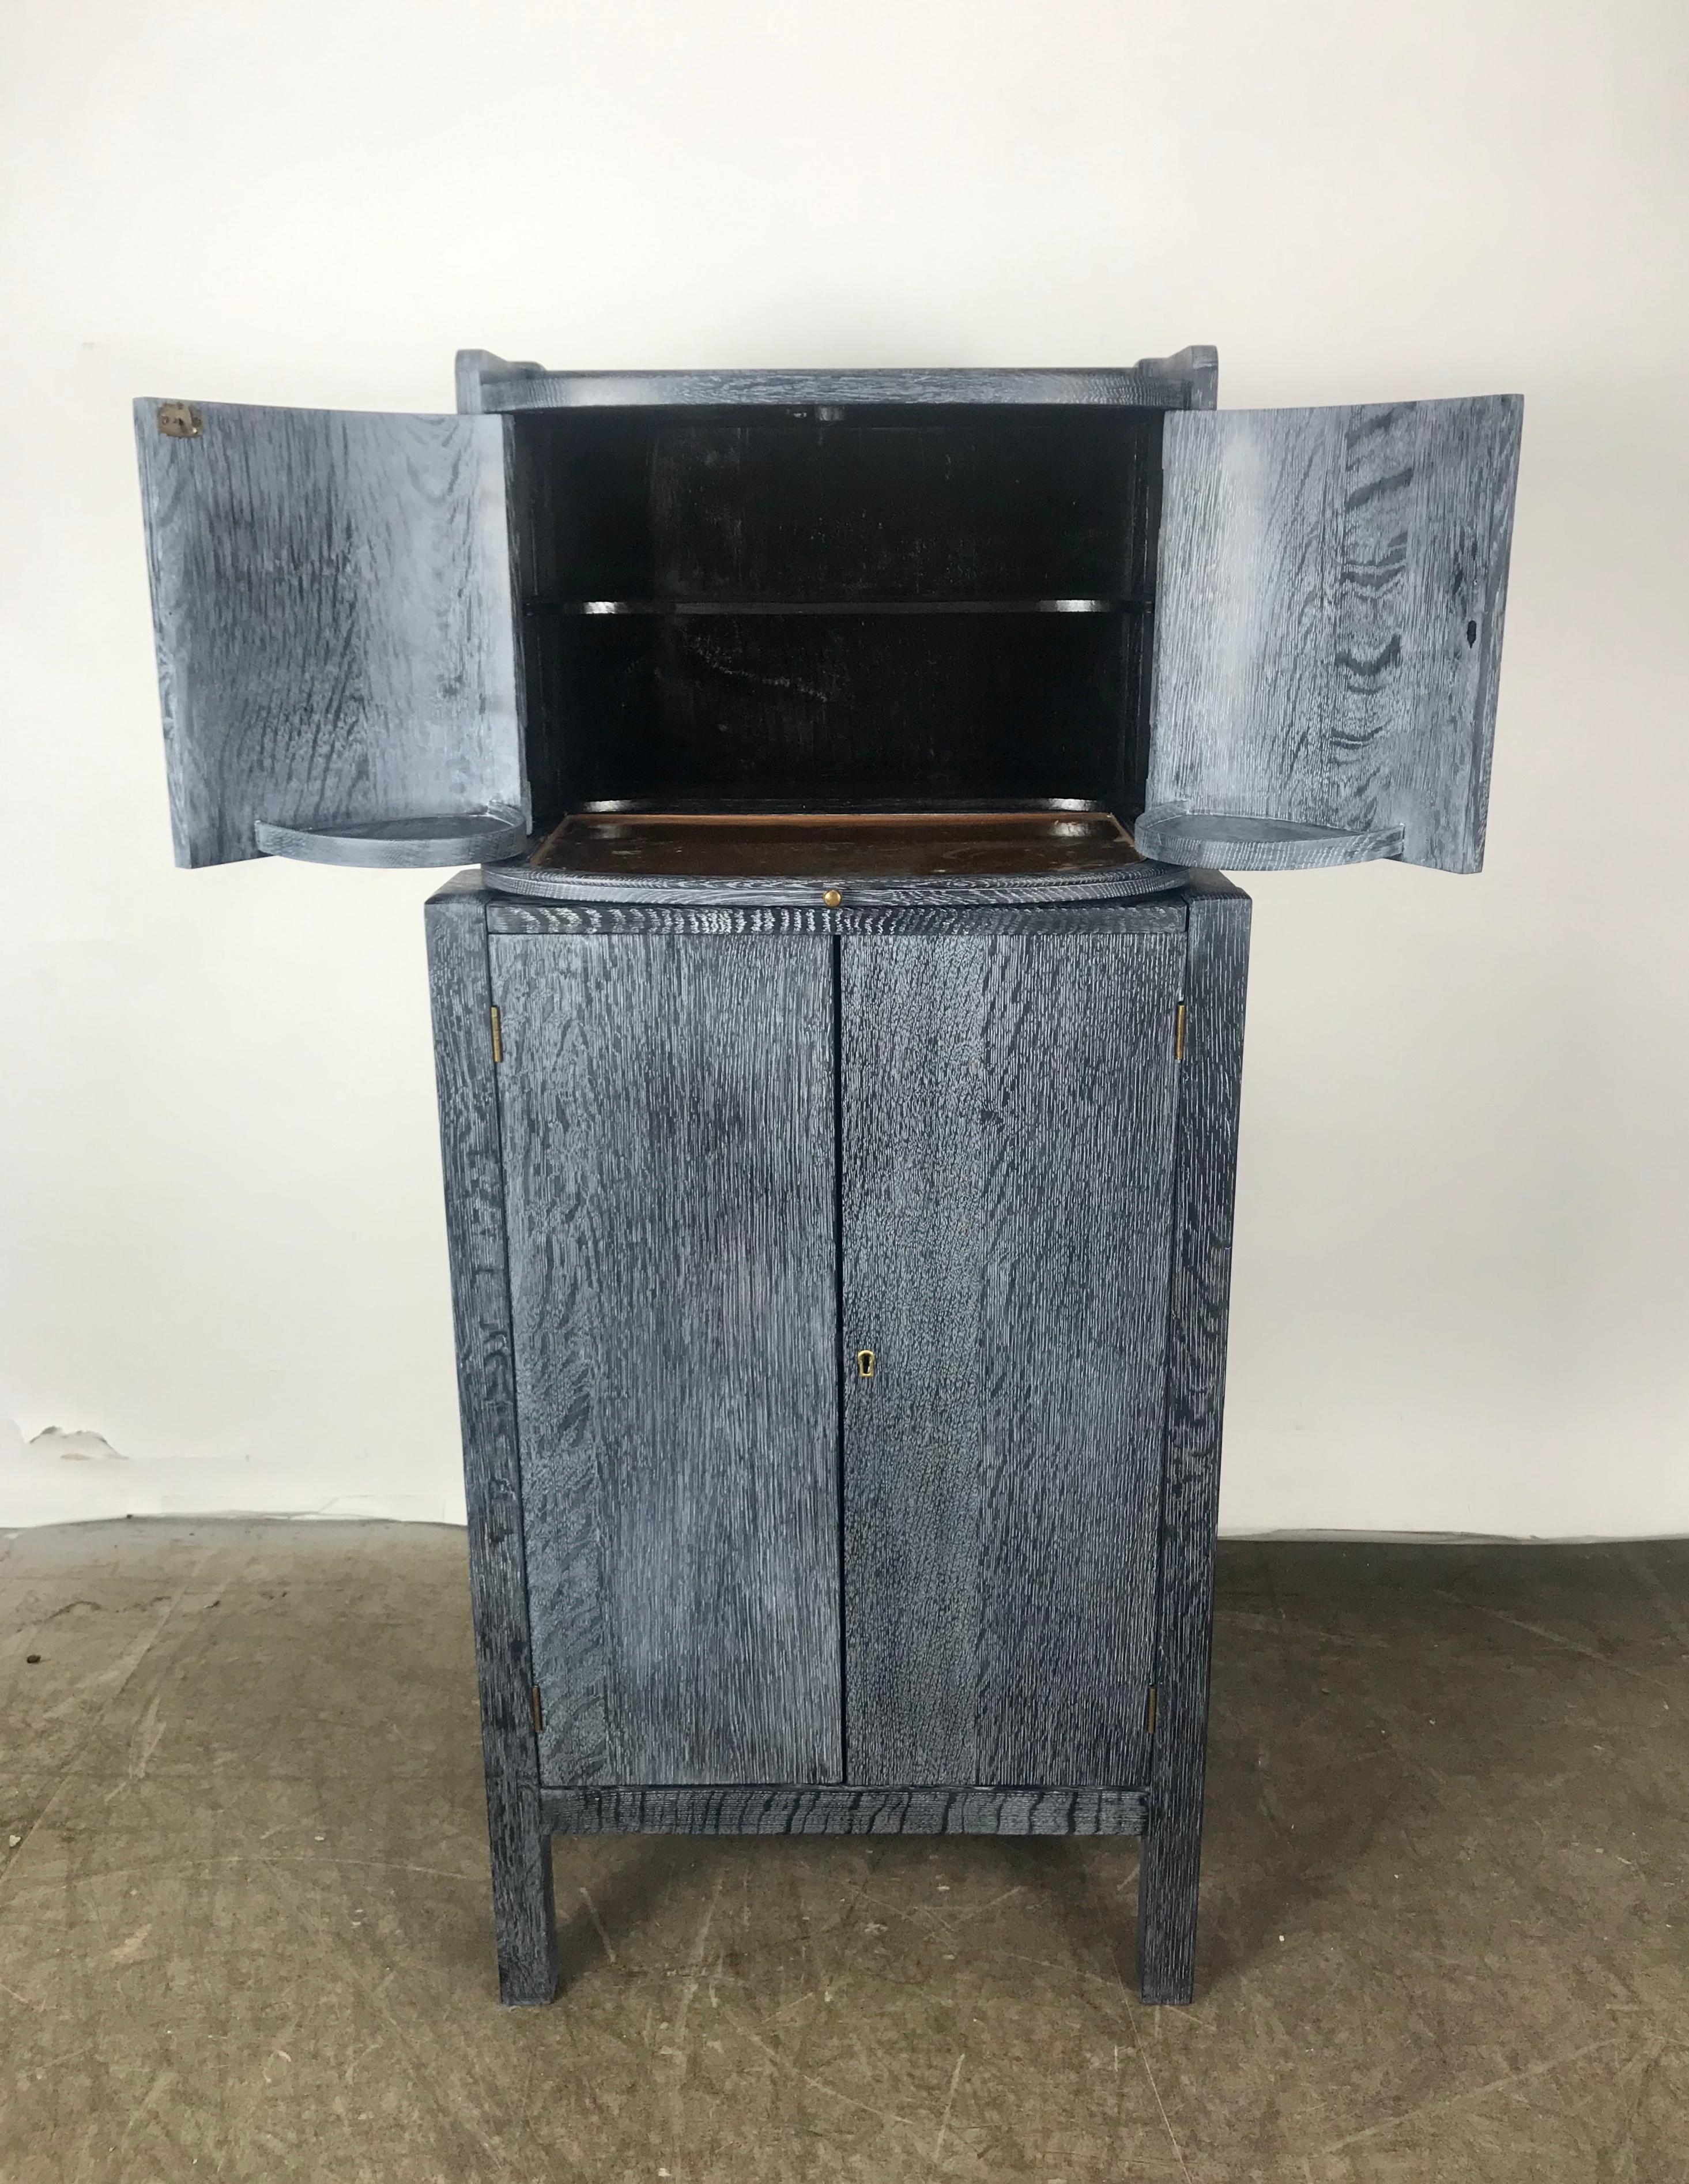 Unusual cerused oak Art Deco modernist gentleman bar /tobacco cabinet, 1940s. Retains original copper pull-out tray. Multi purpose, dry bar, wet bar. Cigar, tobacco storage cabinet, two doors on top with pull out tray for serving or cutting, larger